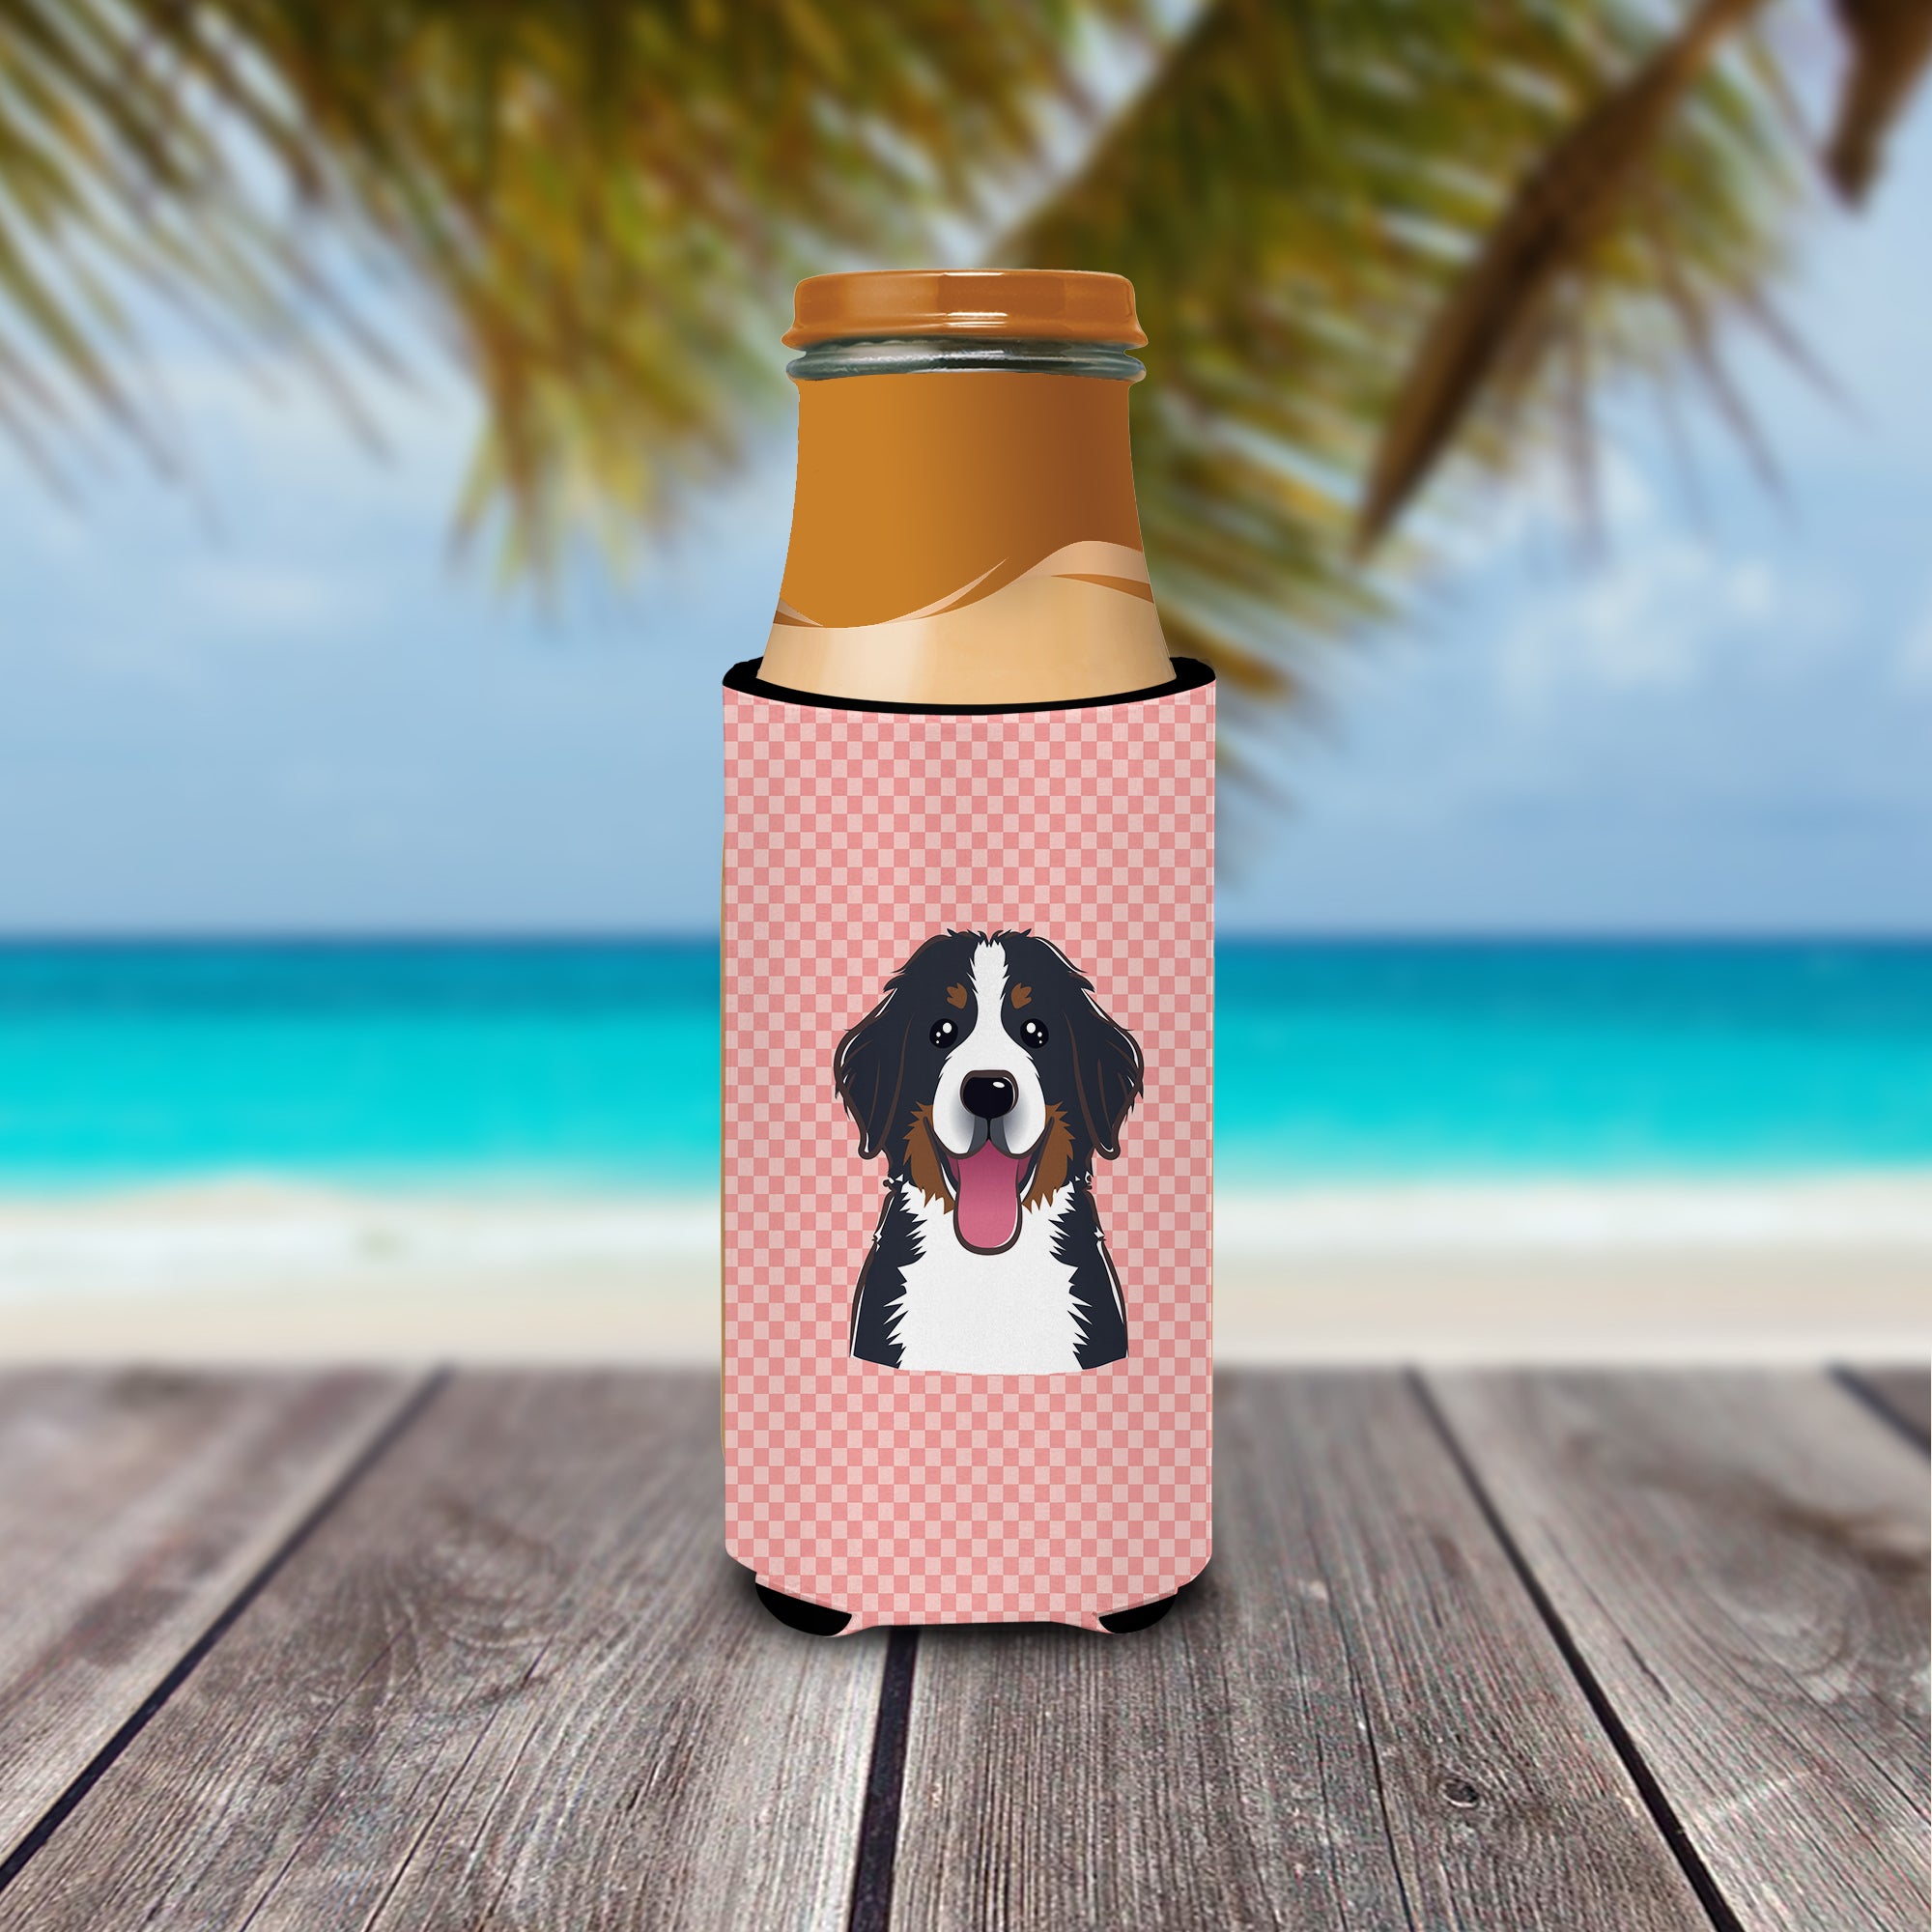 Checkerboard Pink Bernese Mountain Dog Ultra Beverage Insulators for slim cans.